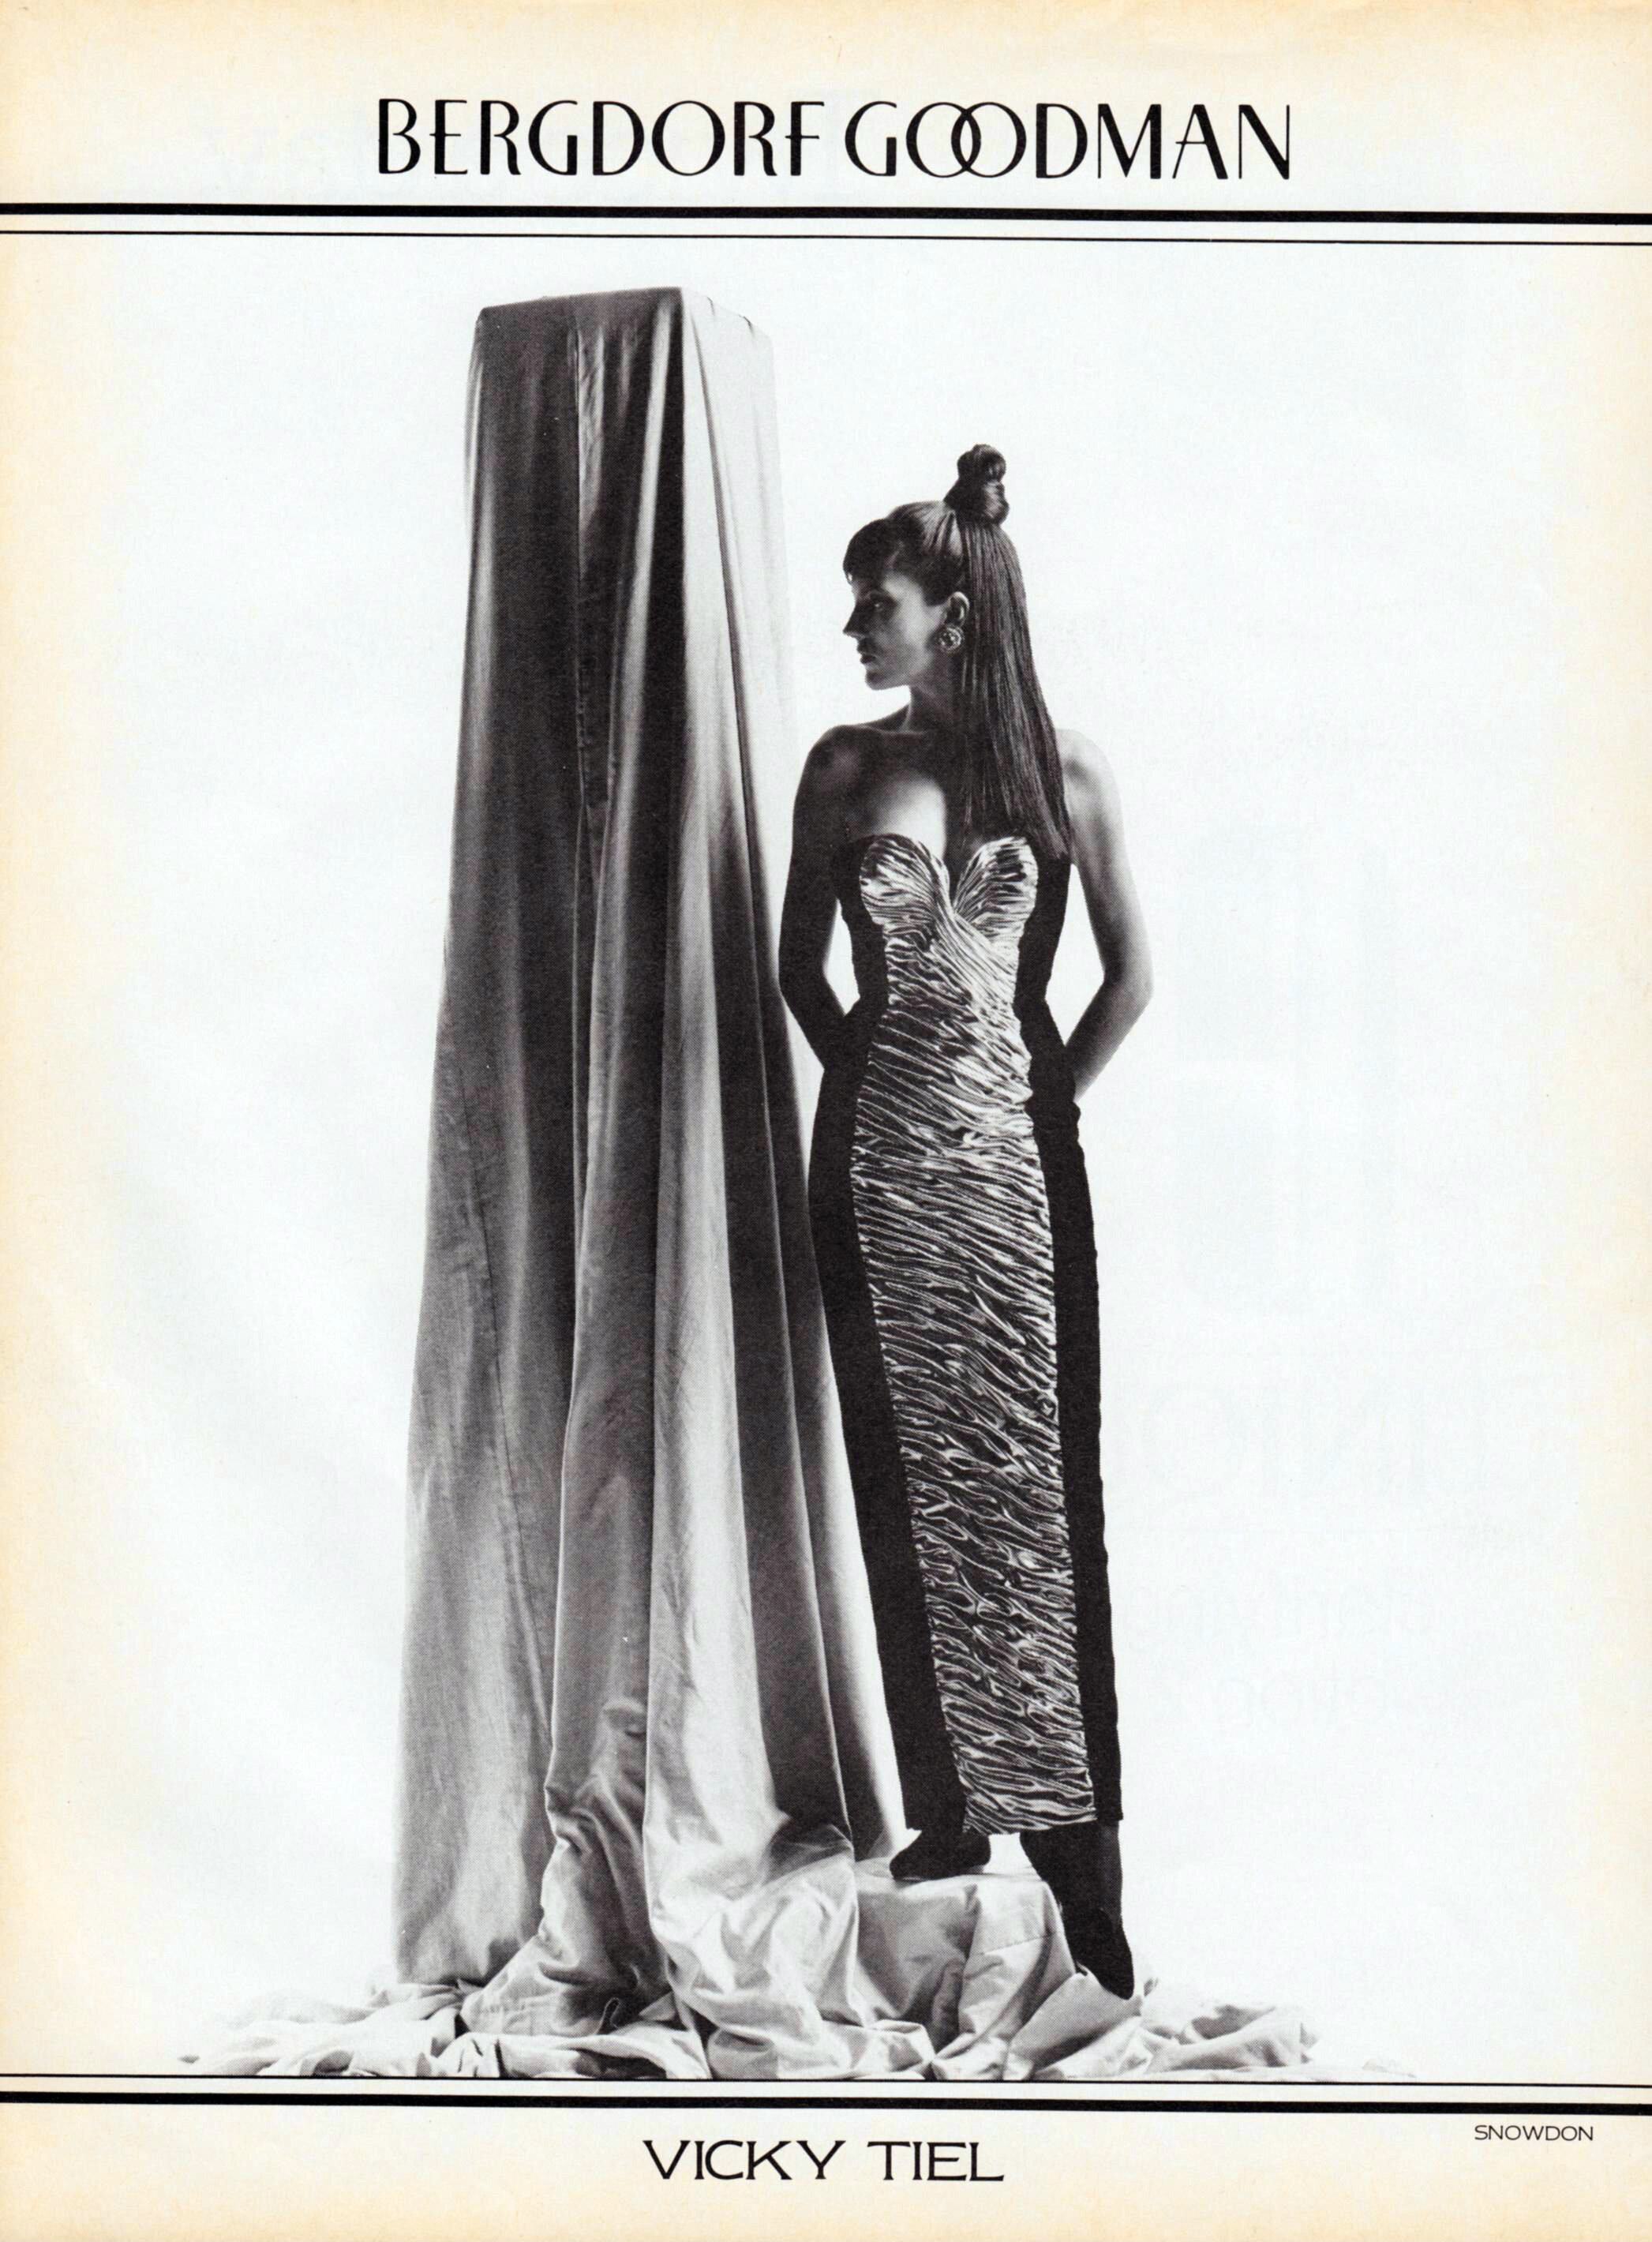 An ad for Vicky Tiel's couture salon at Bergdorf Goodman, 1986.